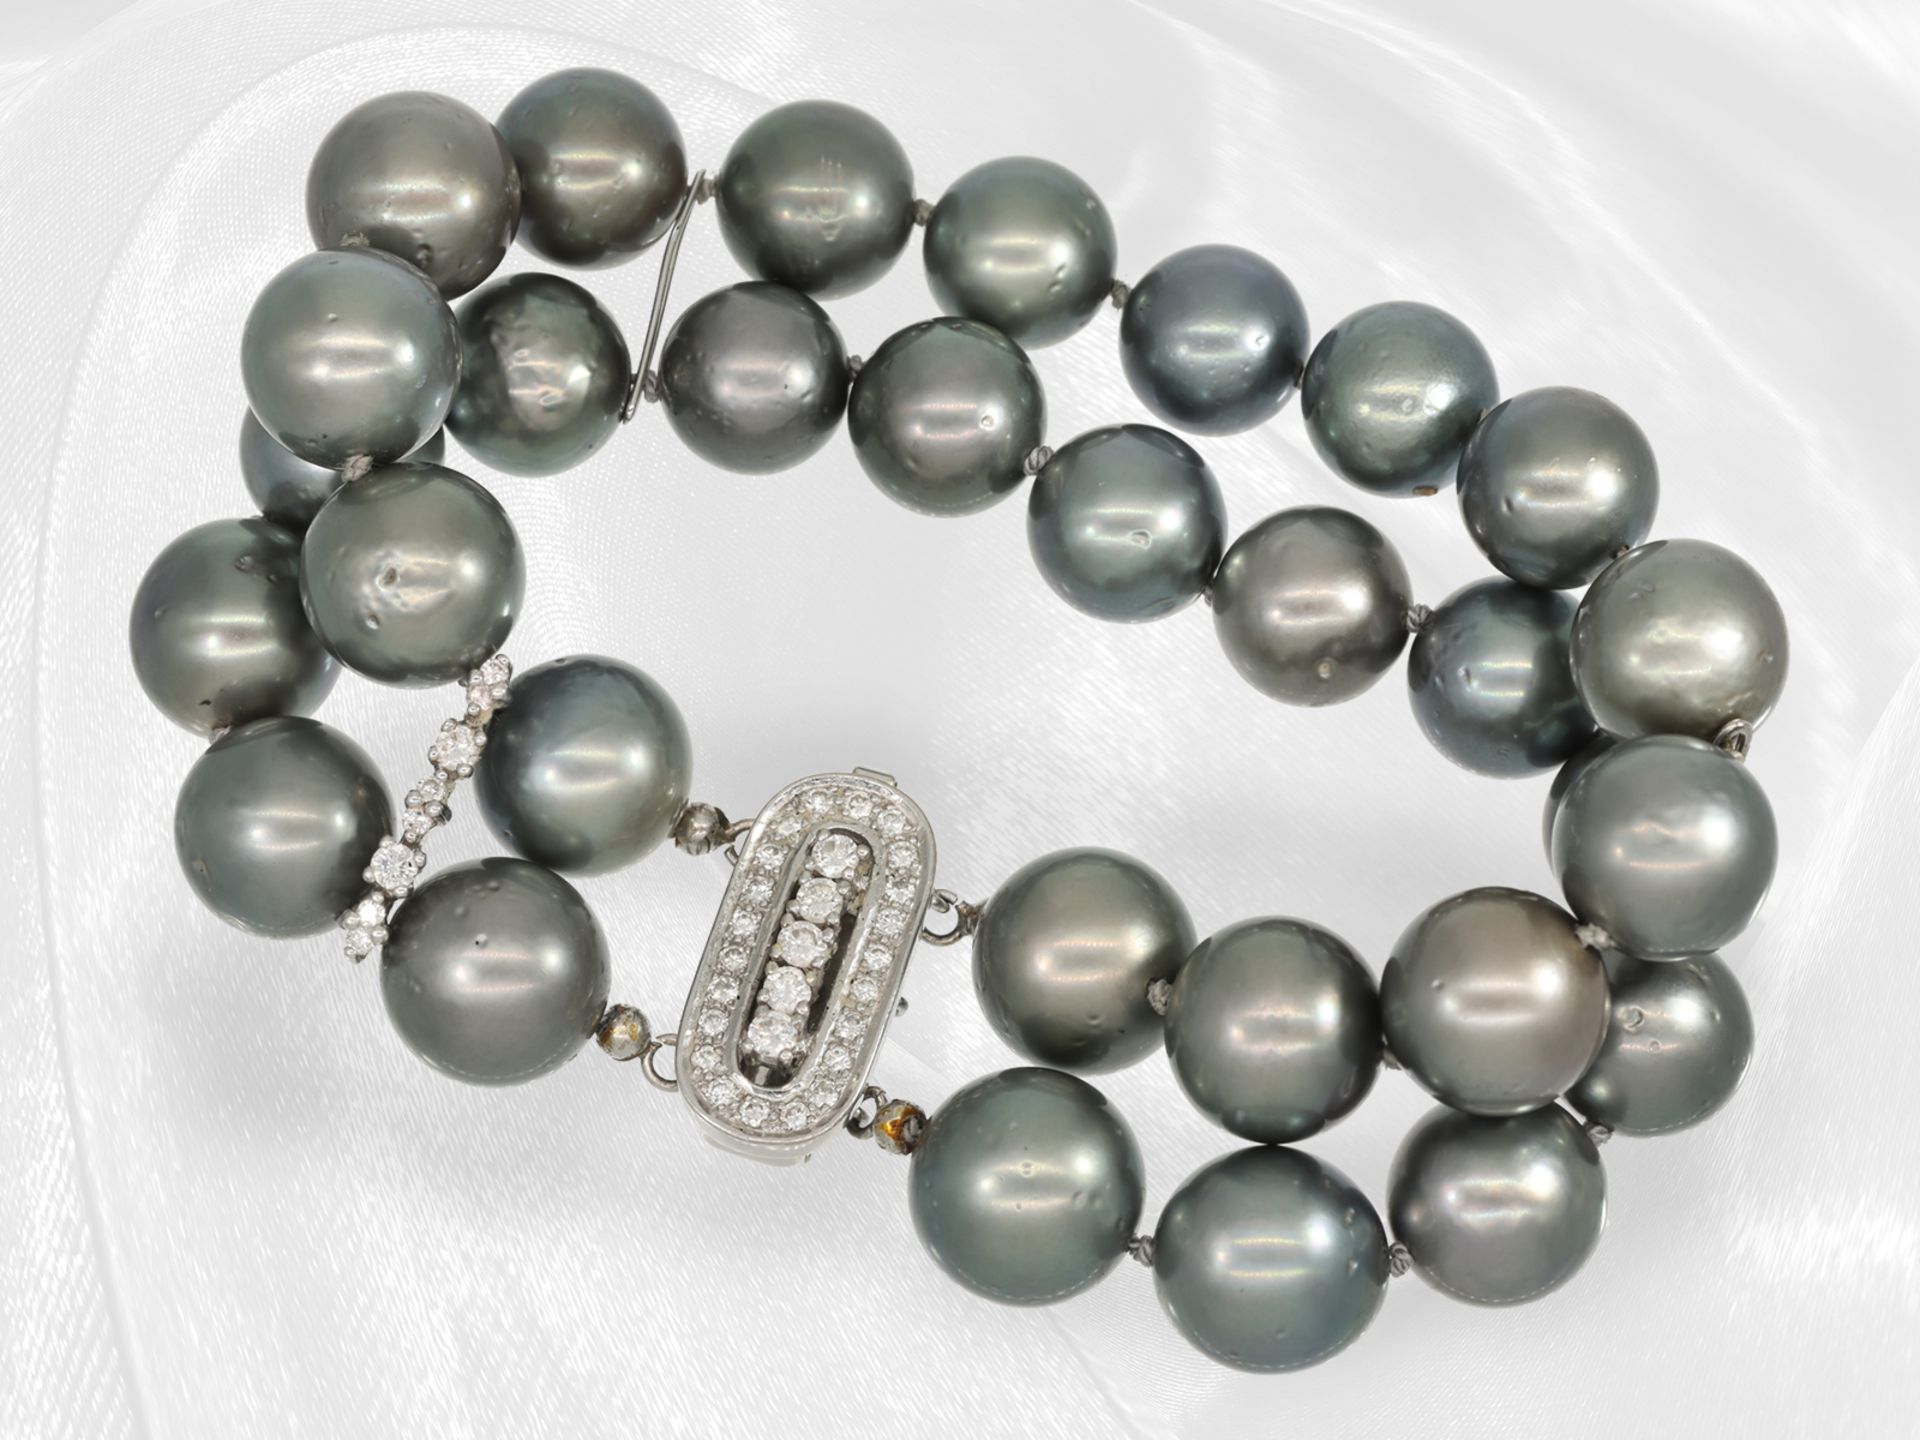 Very decorative double row Tahiti cultured pearl bracelet, 14K white gold clasp set with brilliant-c - Image 2 of 6